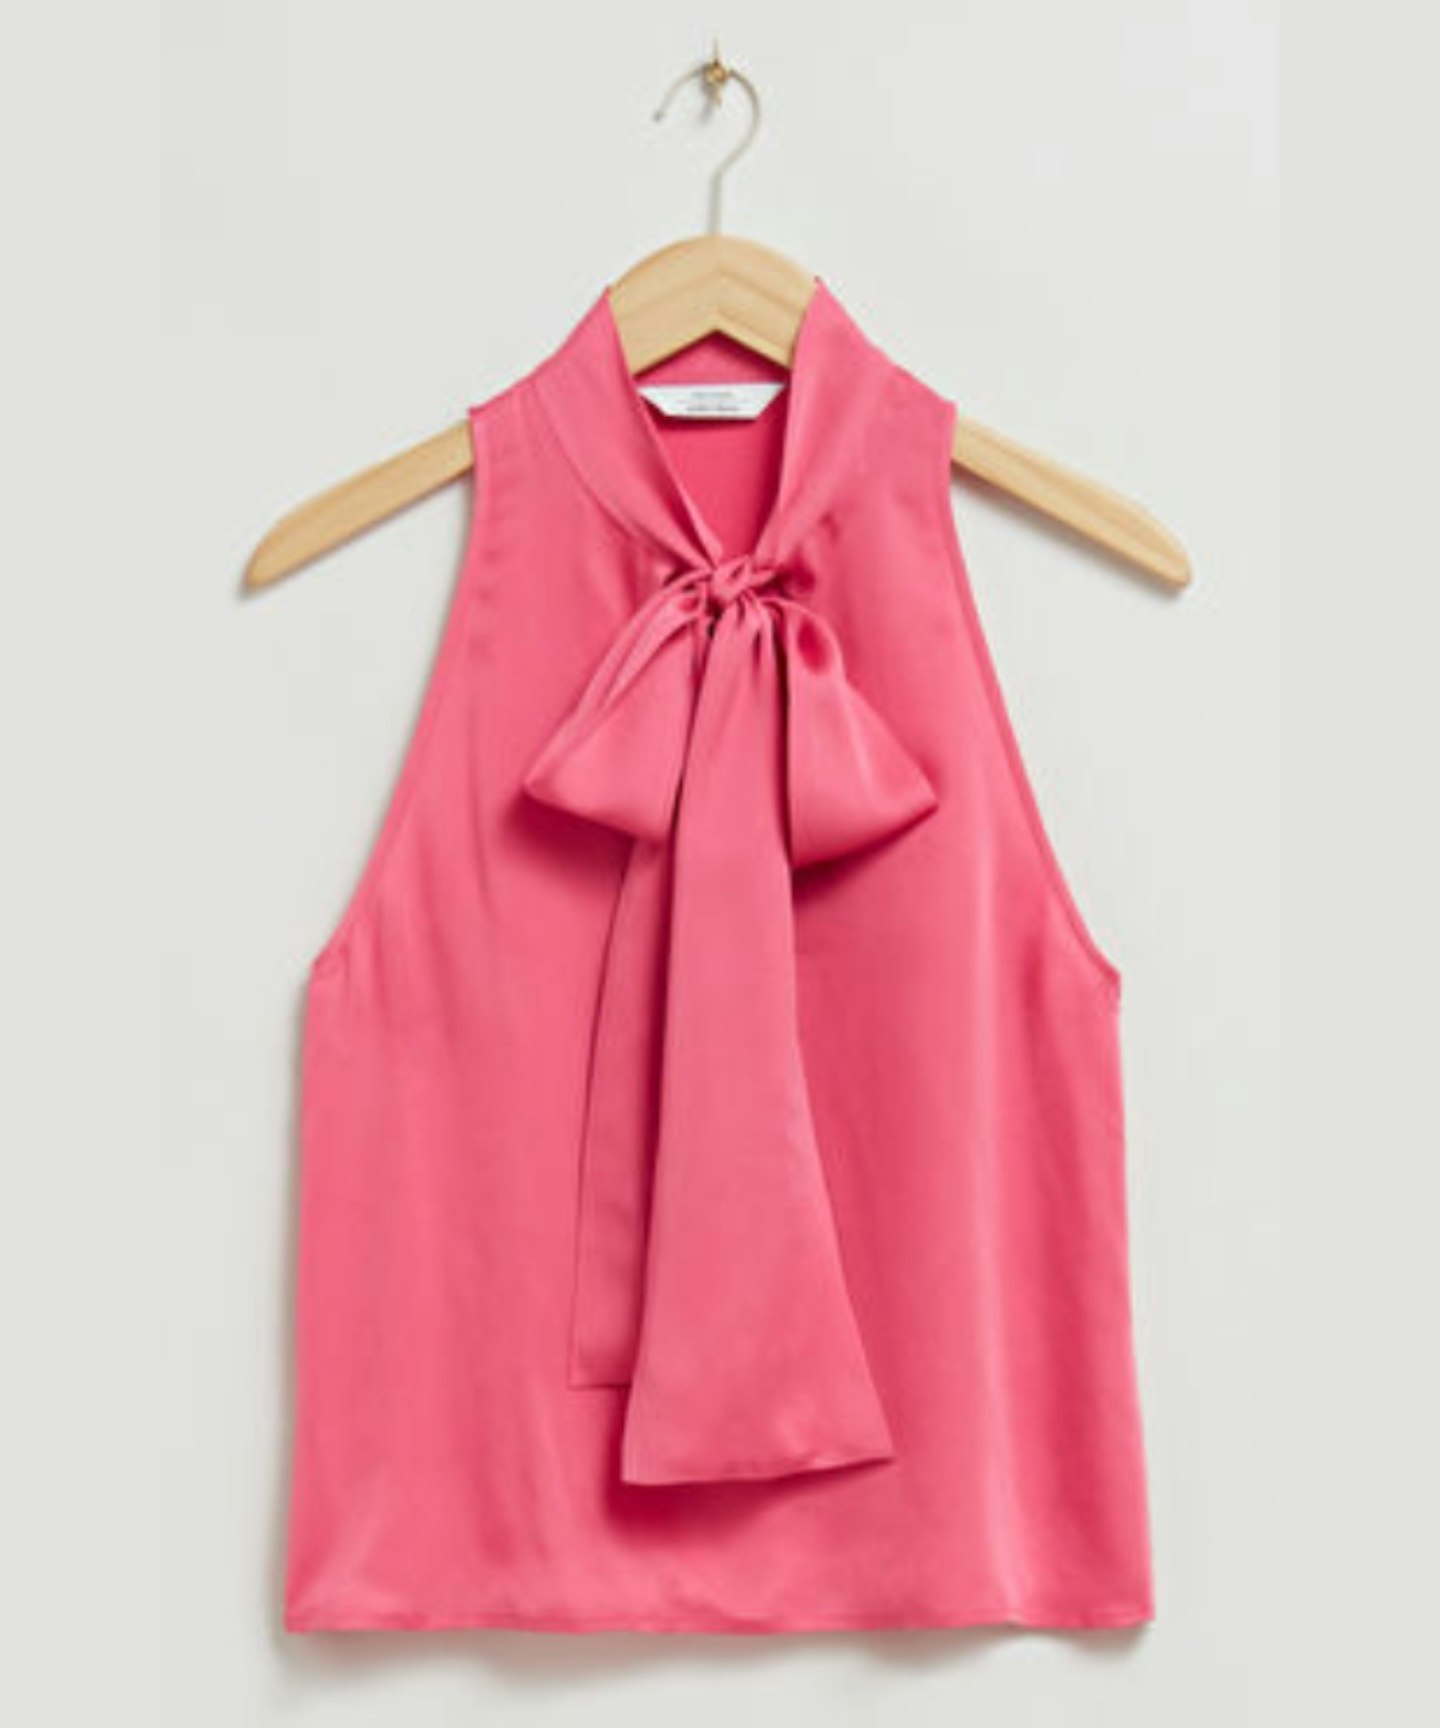 & Other Stories Sleeveless Lavallière-Neck Bow Top